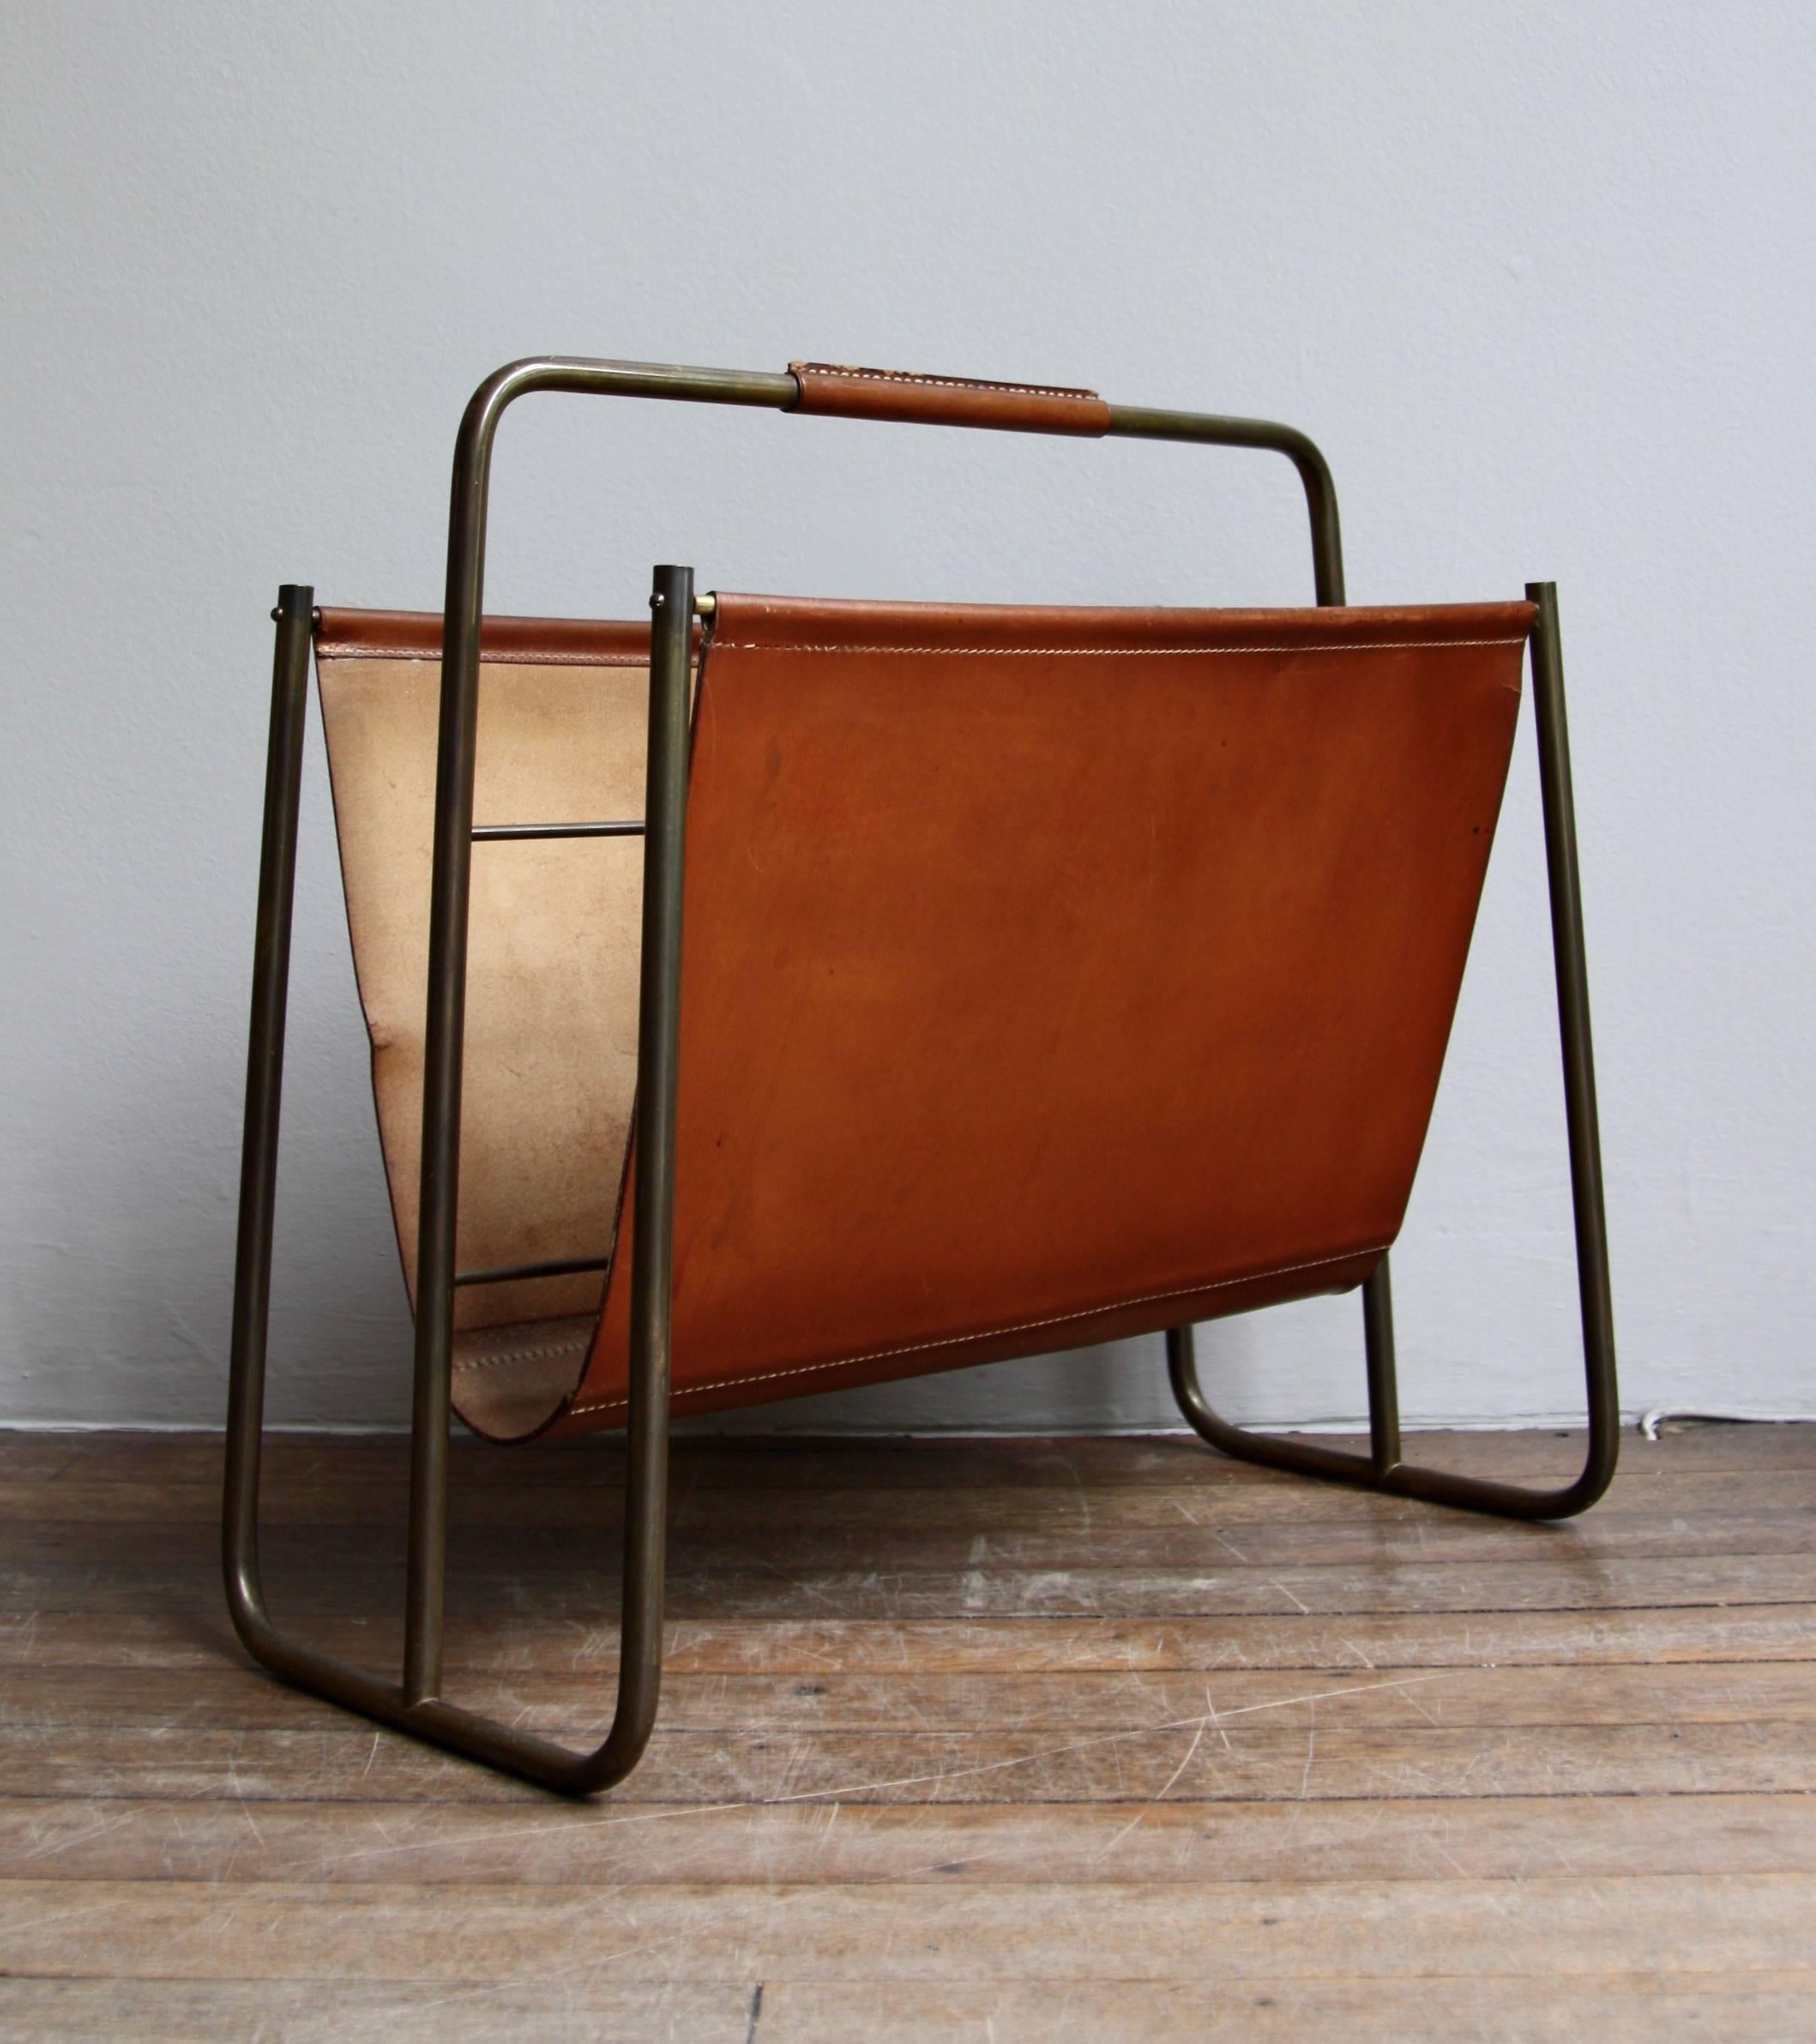 A vintage magazine holder designed and made by Carl Auböck II, Vienna, circa 1950. The rich-clay-coloured leather sling and cladding on the handle is completely original and boasts a luscious patina. Similarly, the geometric brass frame is covered